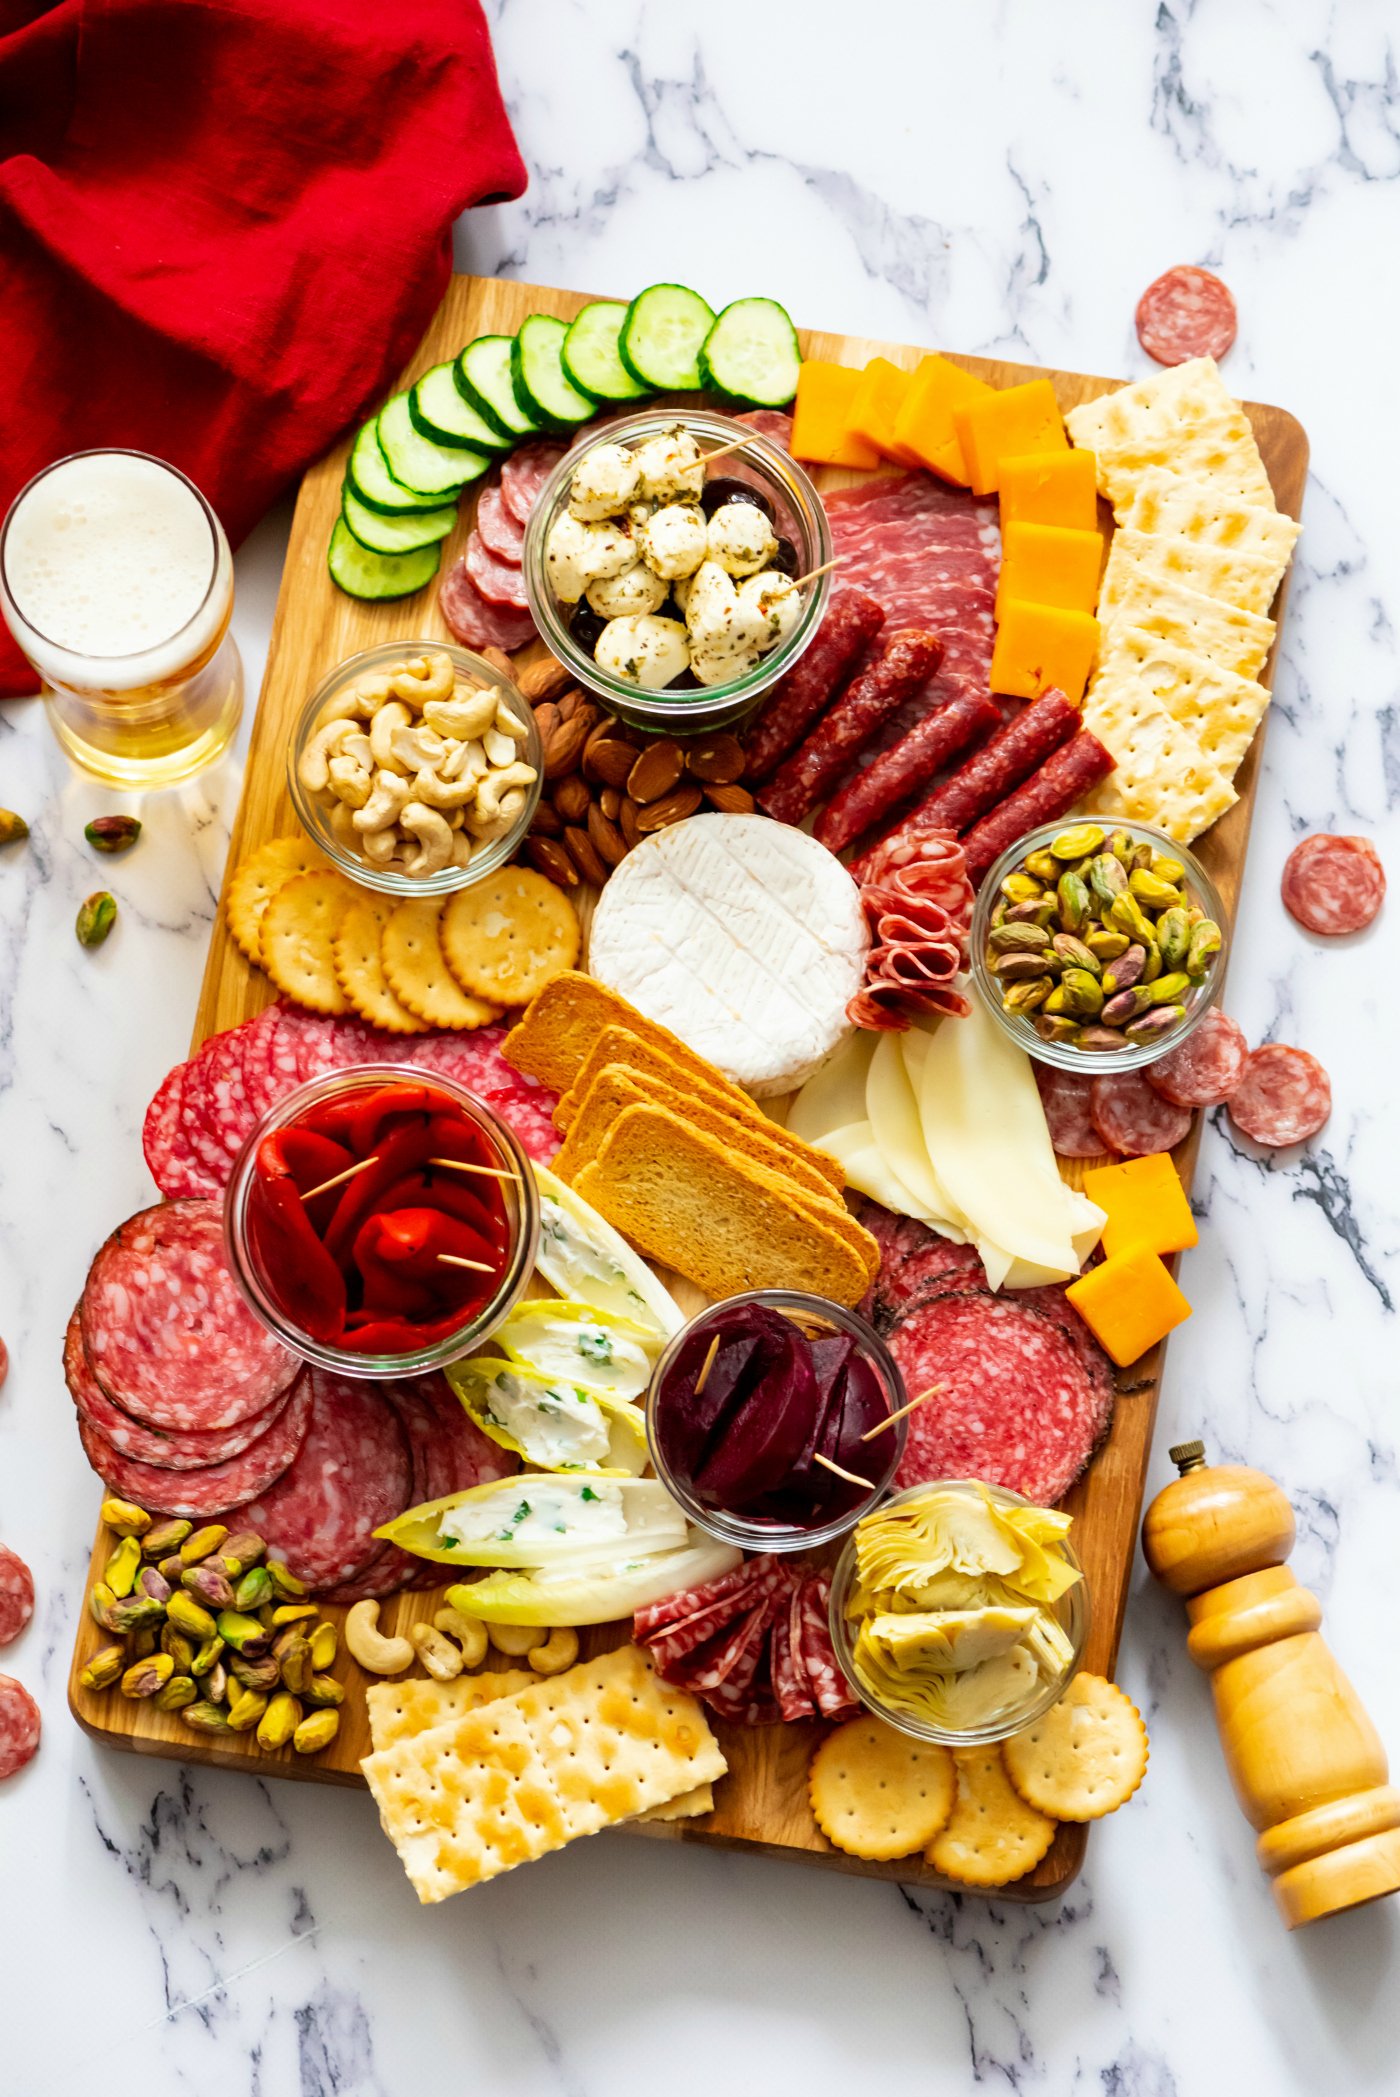 7 Ways To Package Single-Serve Charcuterie